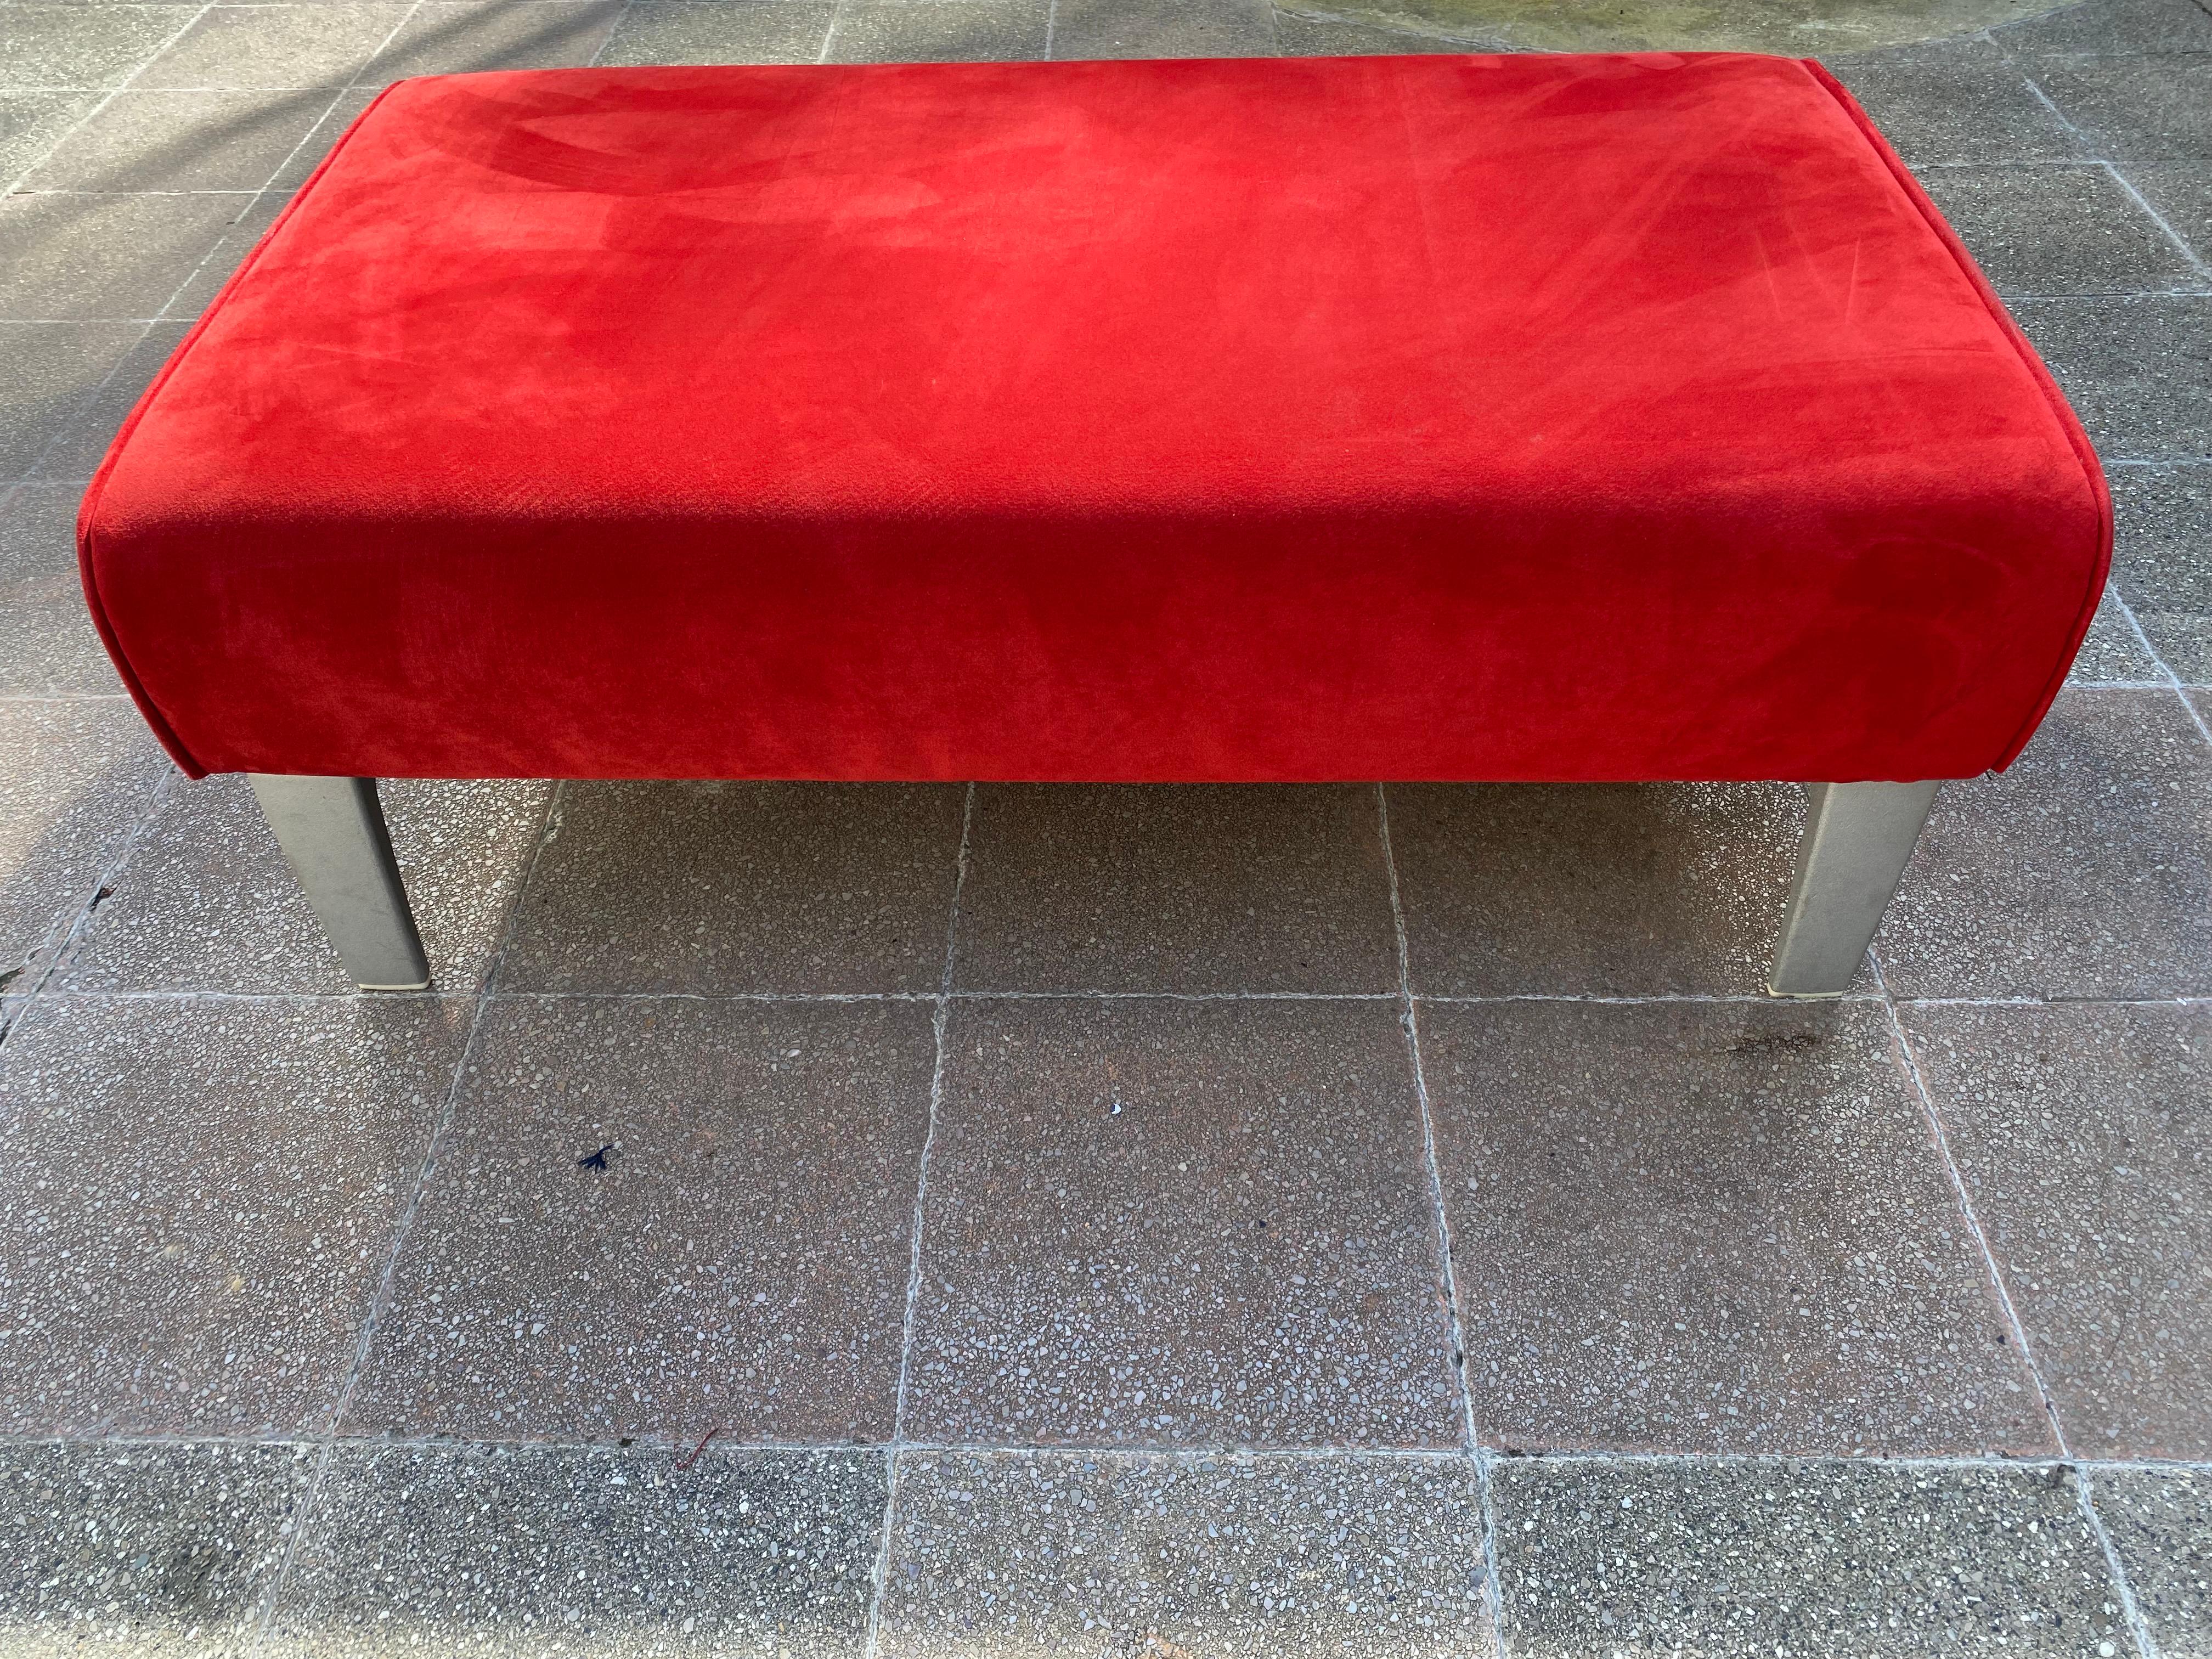 Bench footrest
Alcantara red
Stainless steel feet
Circa 2000
Measures: L 105x W 60 x H 40.